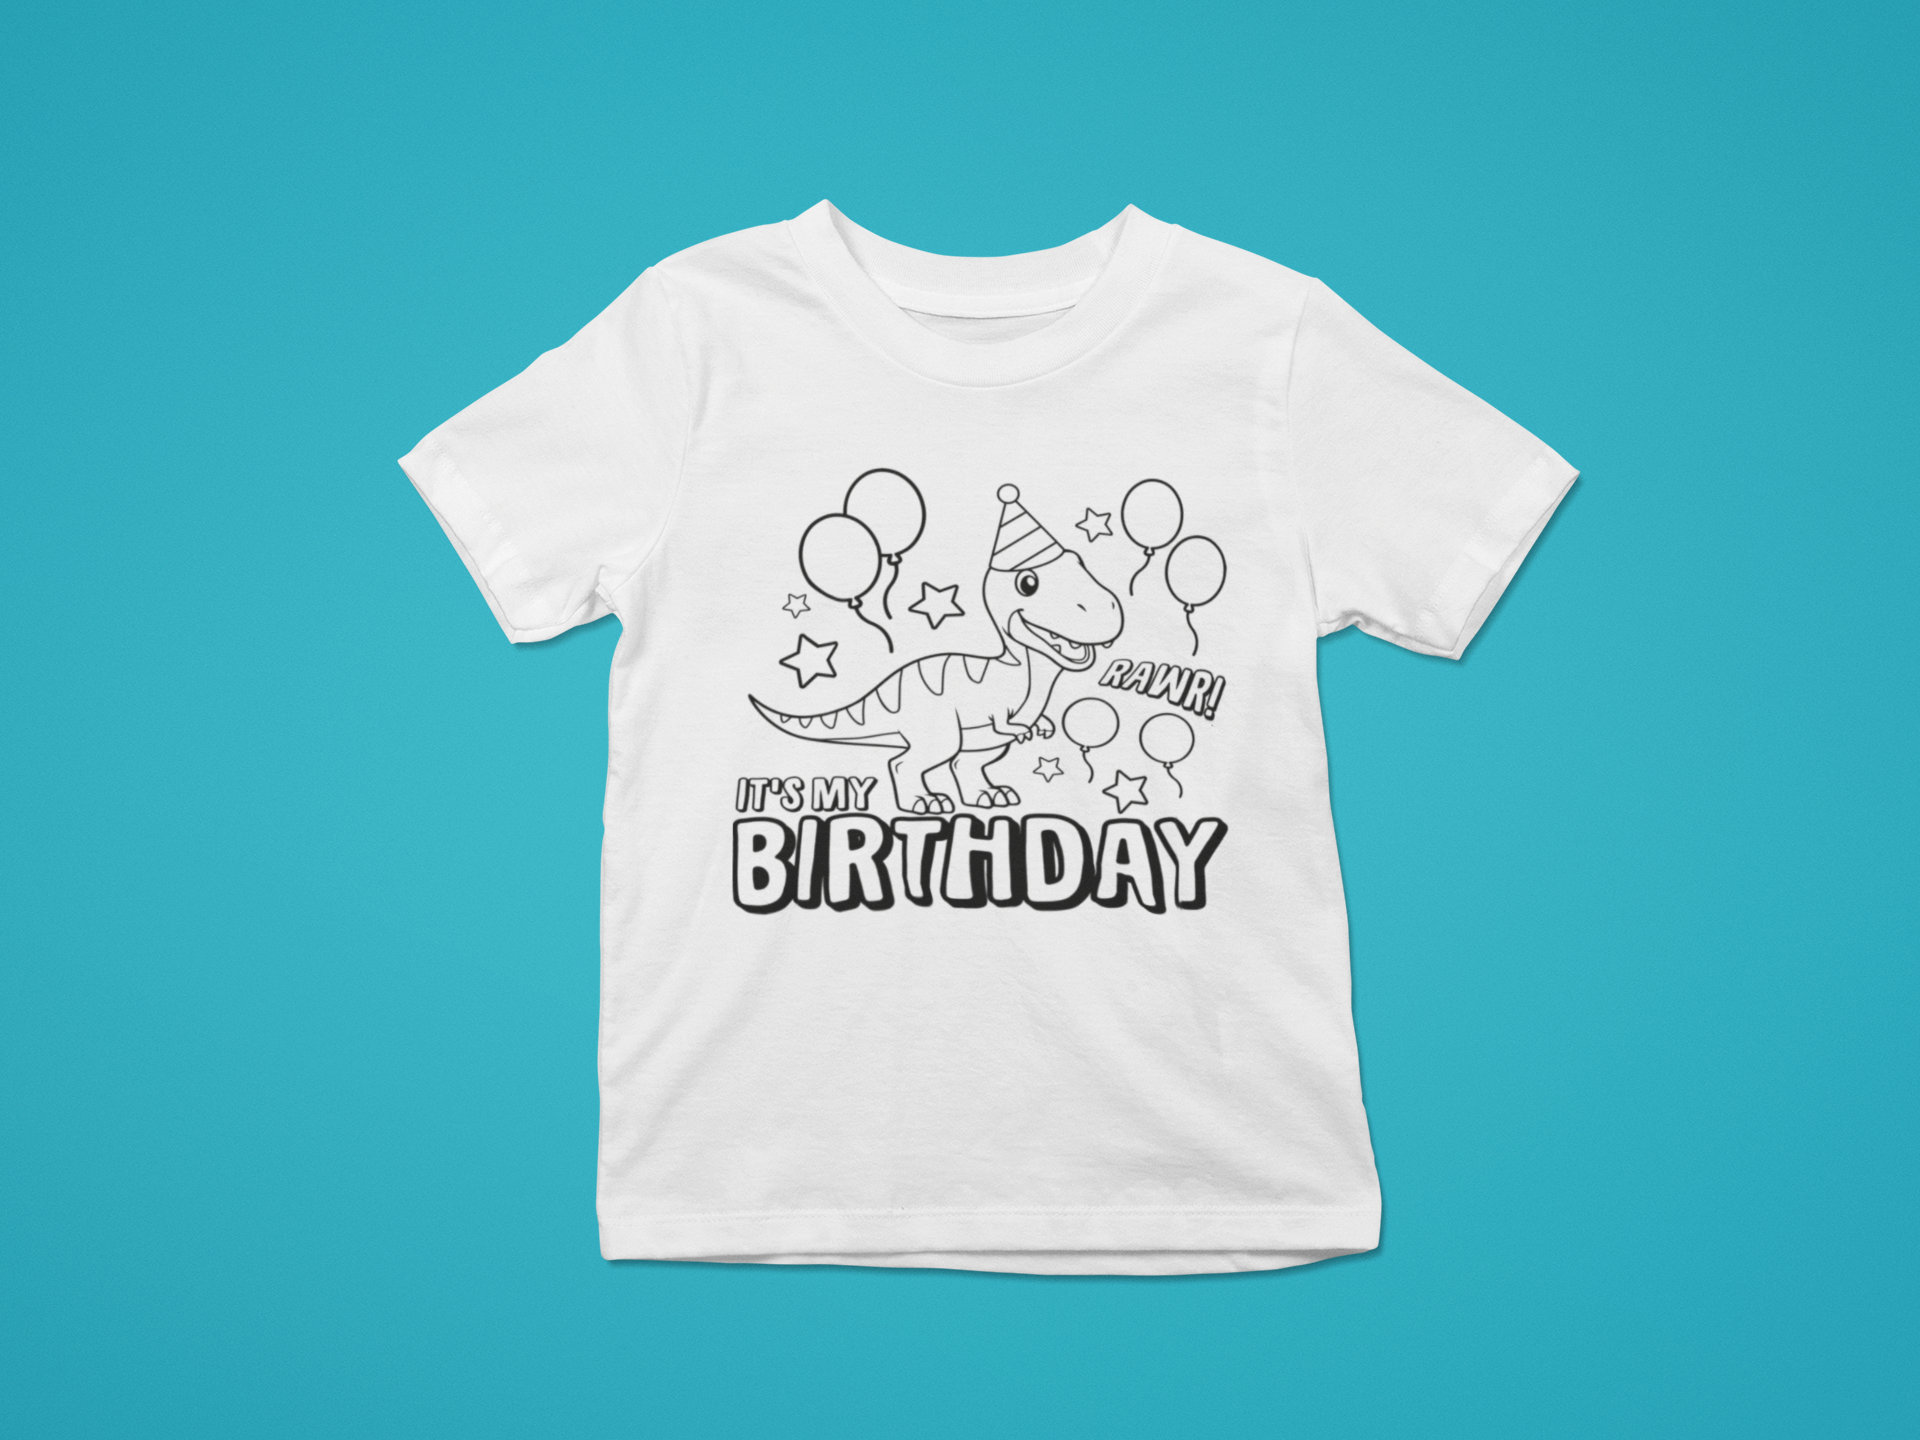 DIY Coloring Kits for Adults, Kids, Toddlers, Babies, Wolf and Steve  Inspired Shirt T Shirt Personalize Custom Party Favors 